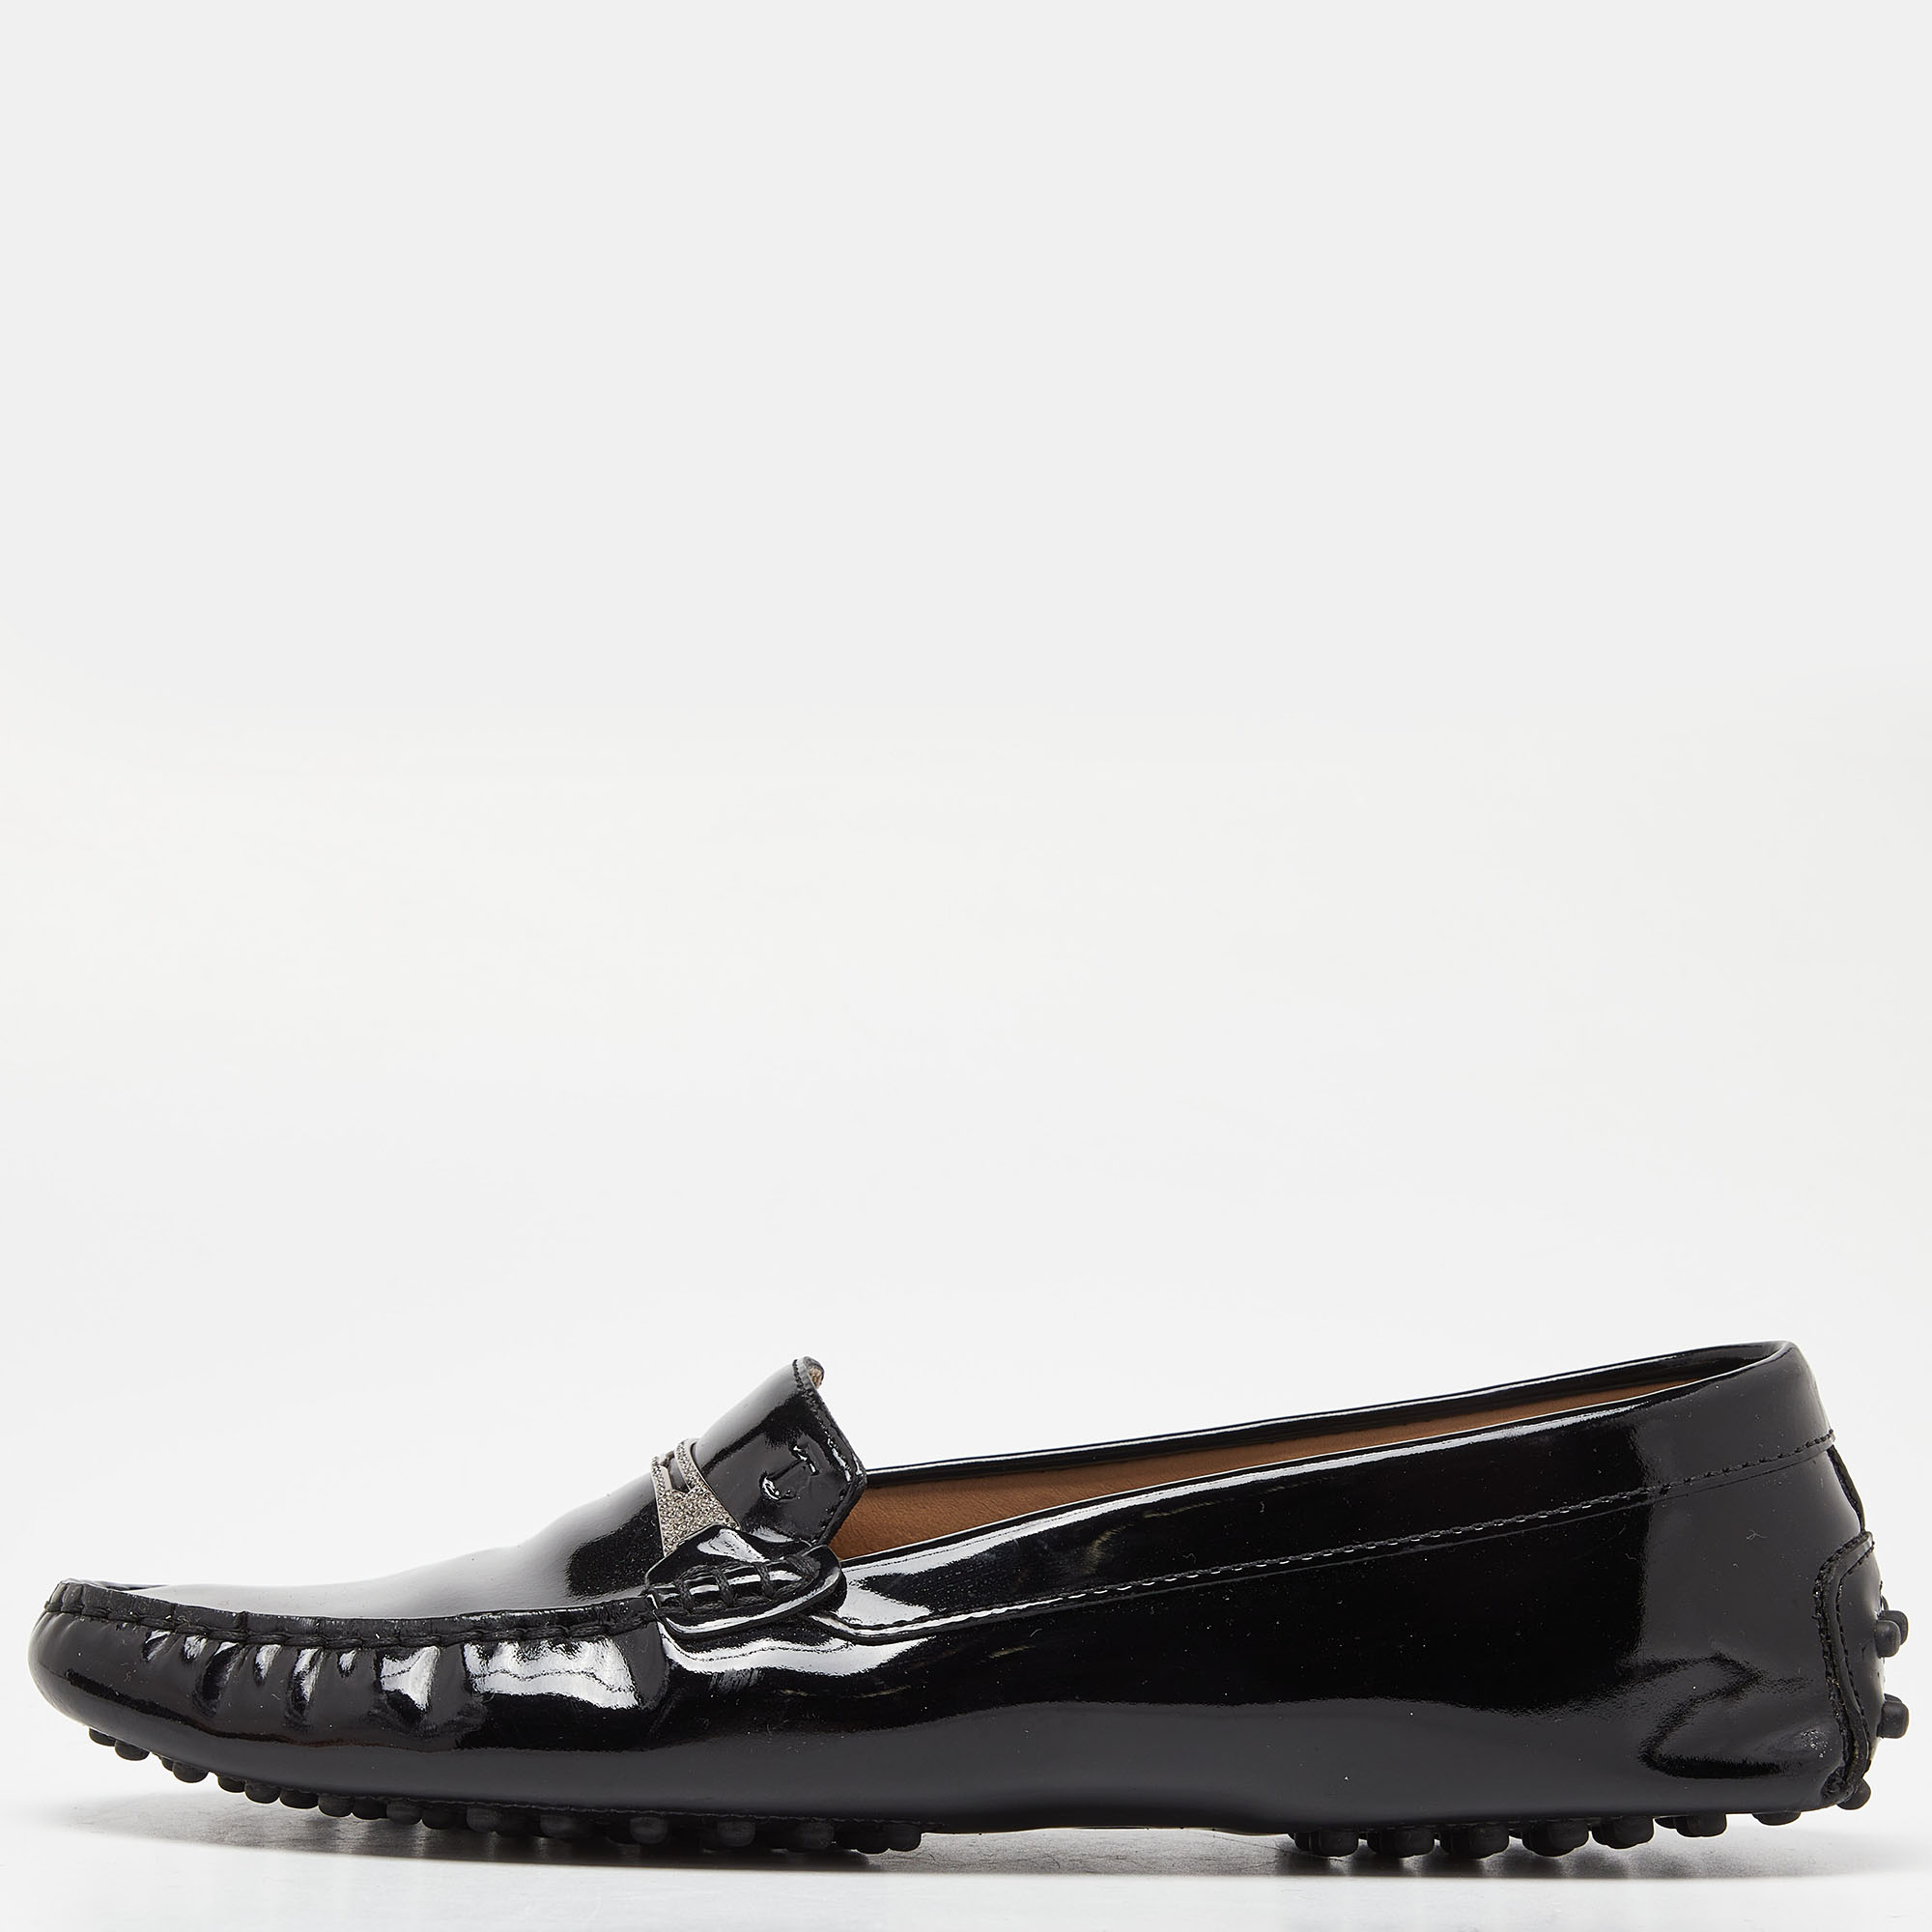 

Tod's Black Patent Leather Penny Loafers Size